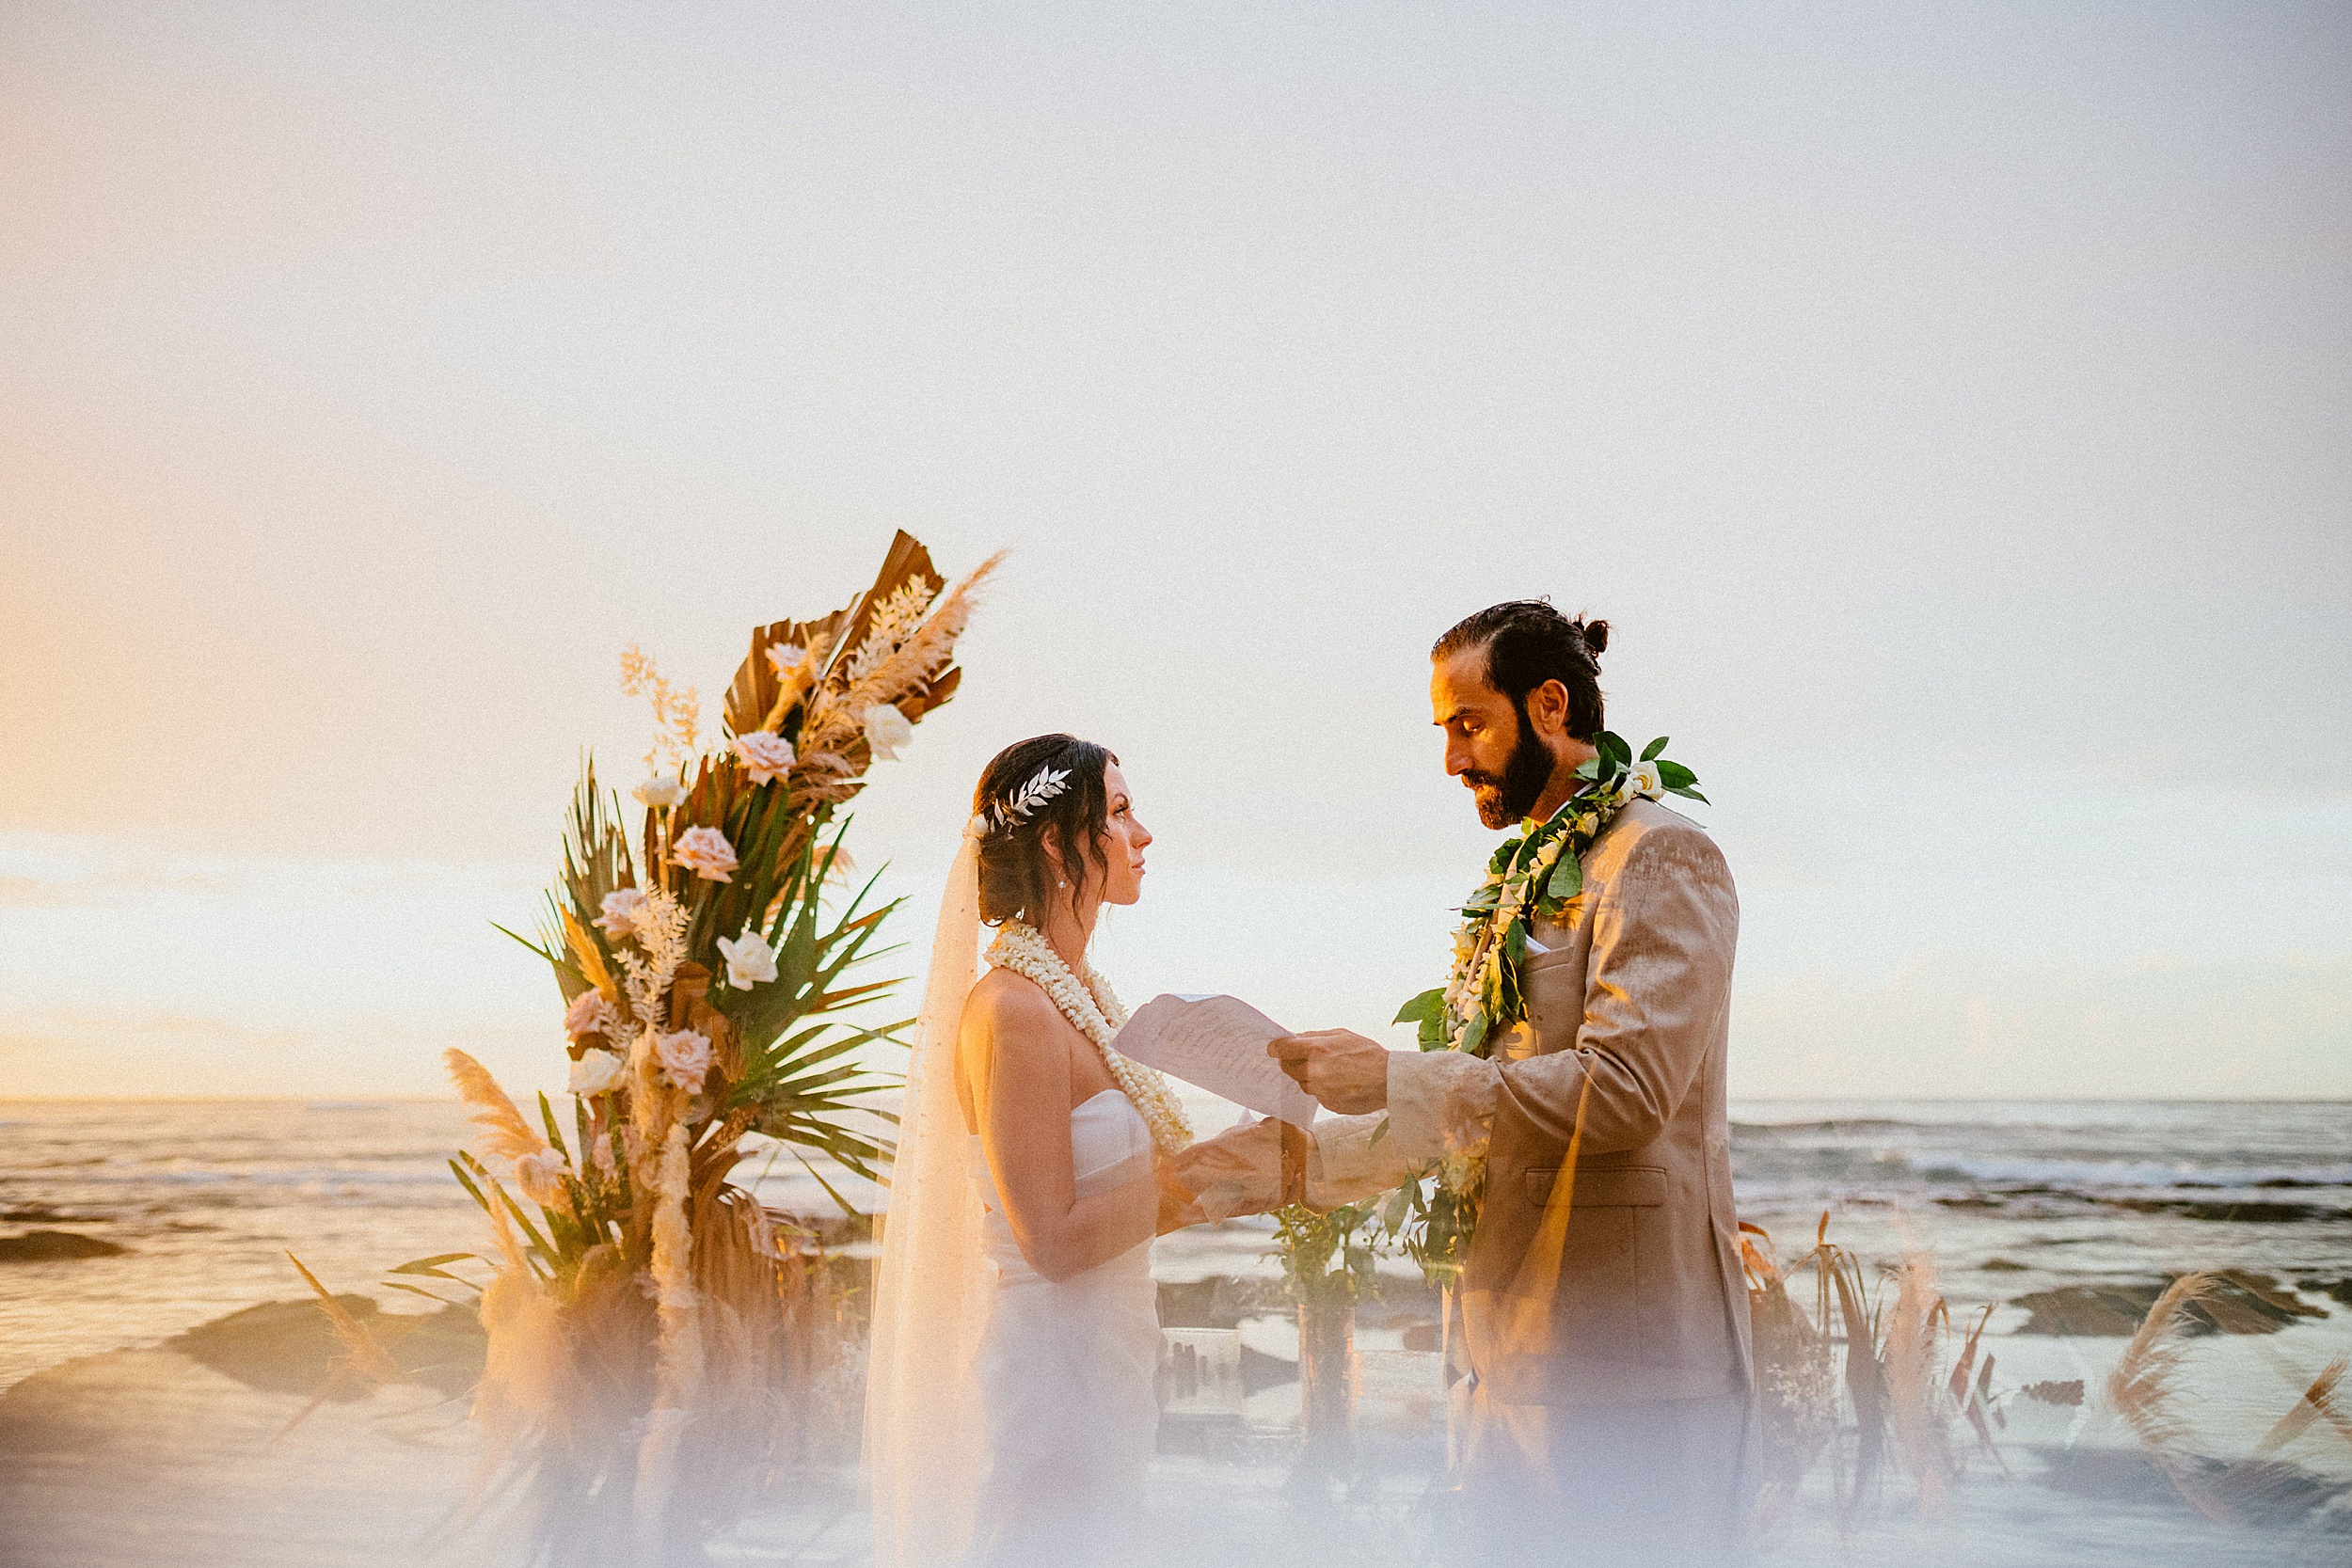 bride and groom reading vows puako hawaii landscape

